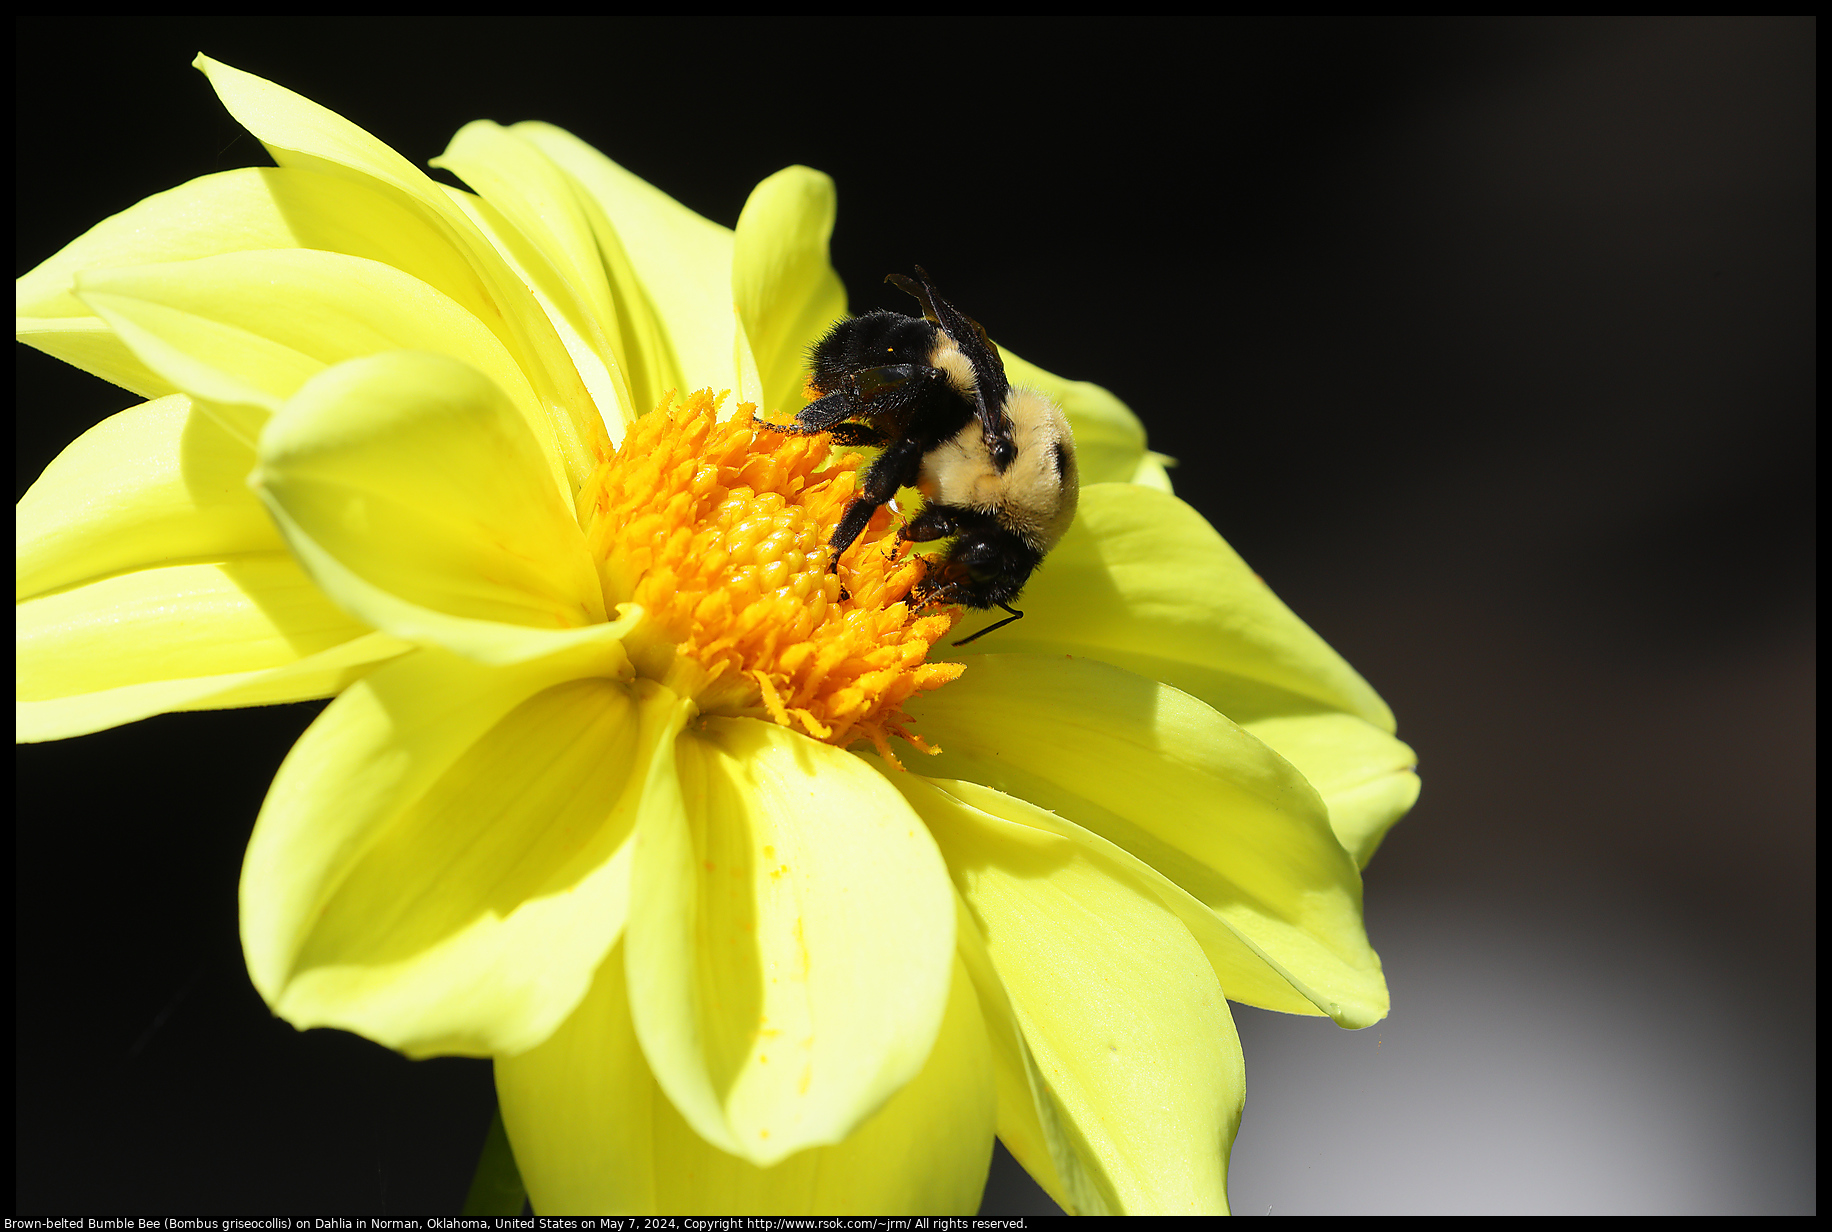 Brown-belted Bumble Bee (Bombus griseocollis) on Dahlia in Norman, Oklahoma, United States on May 7, 2024